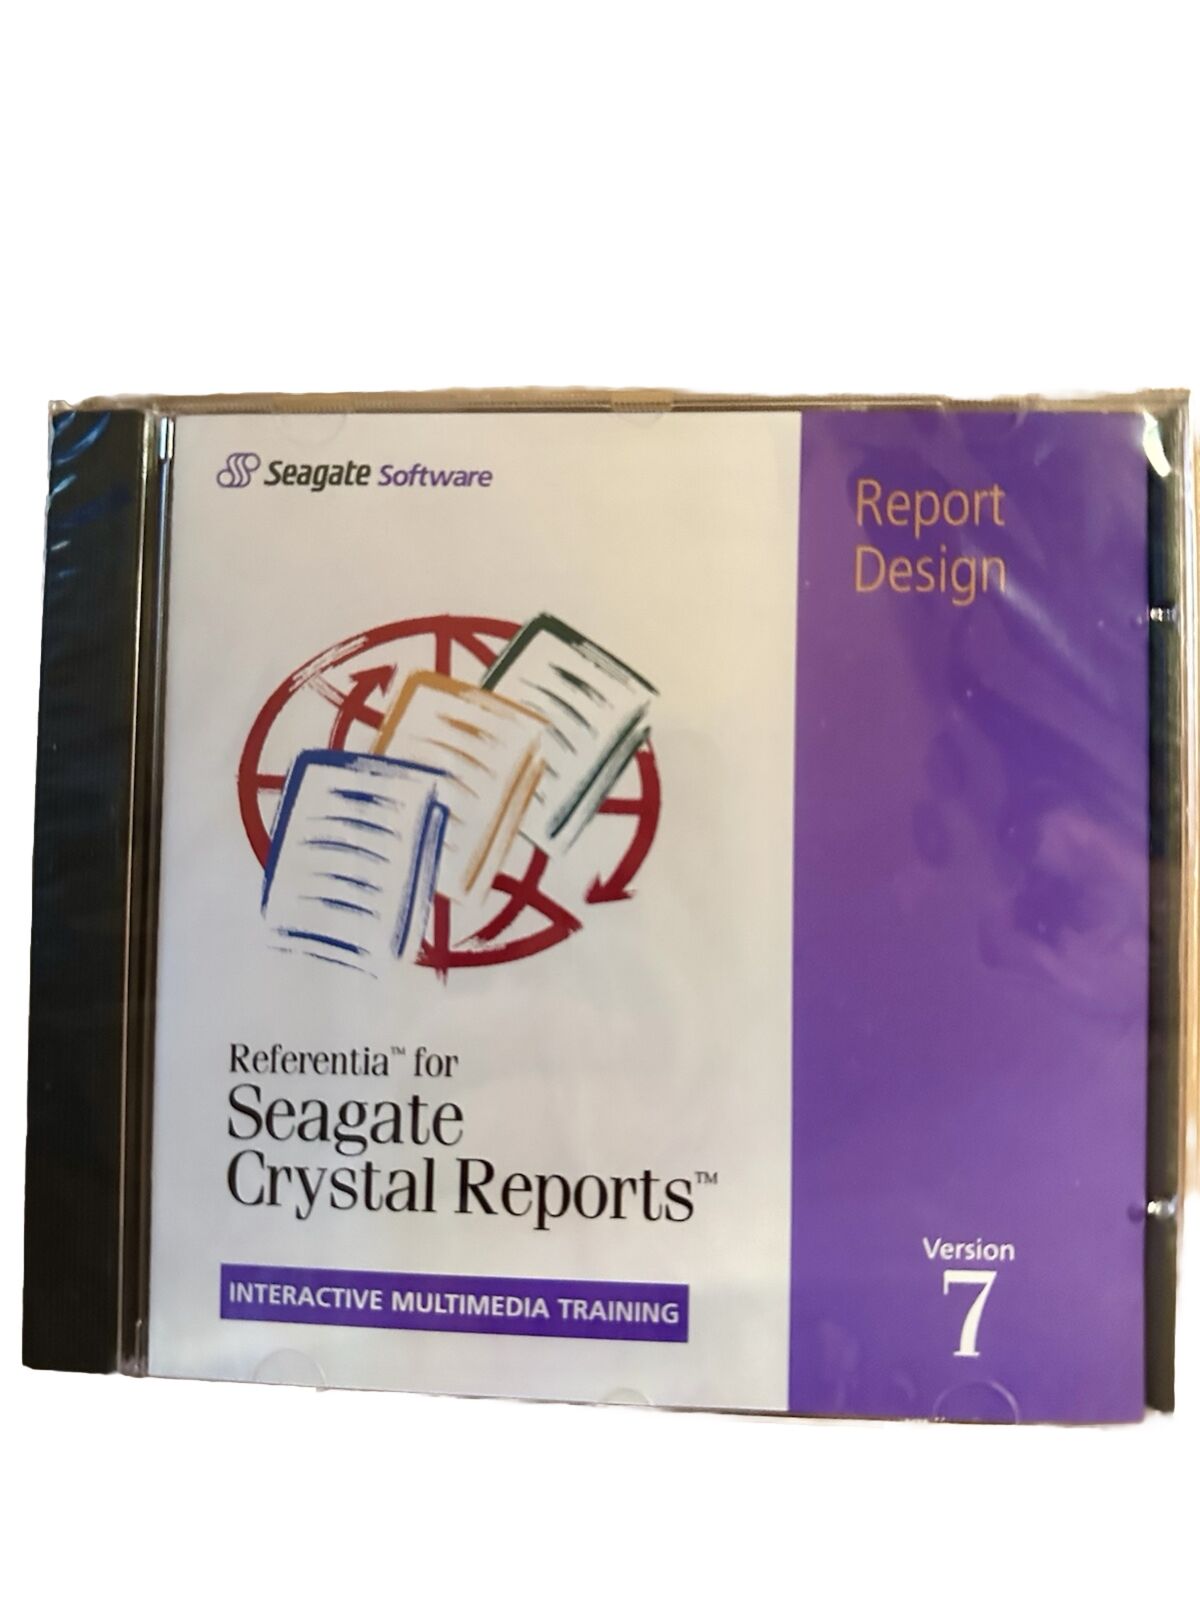 Rare Vintage new 1998 Seagate Crystal Reports v7 Interactive Training CD